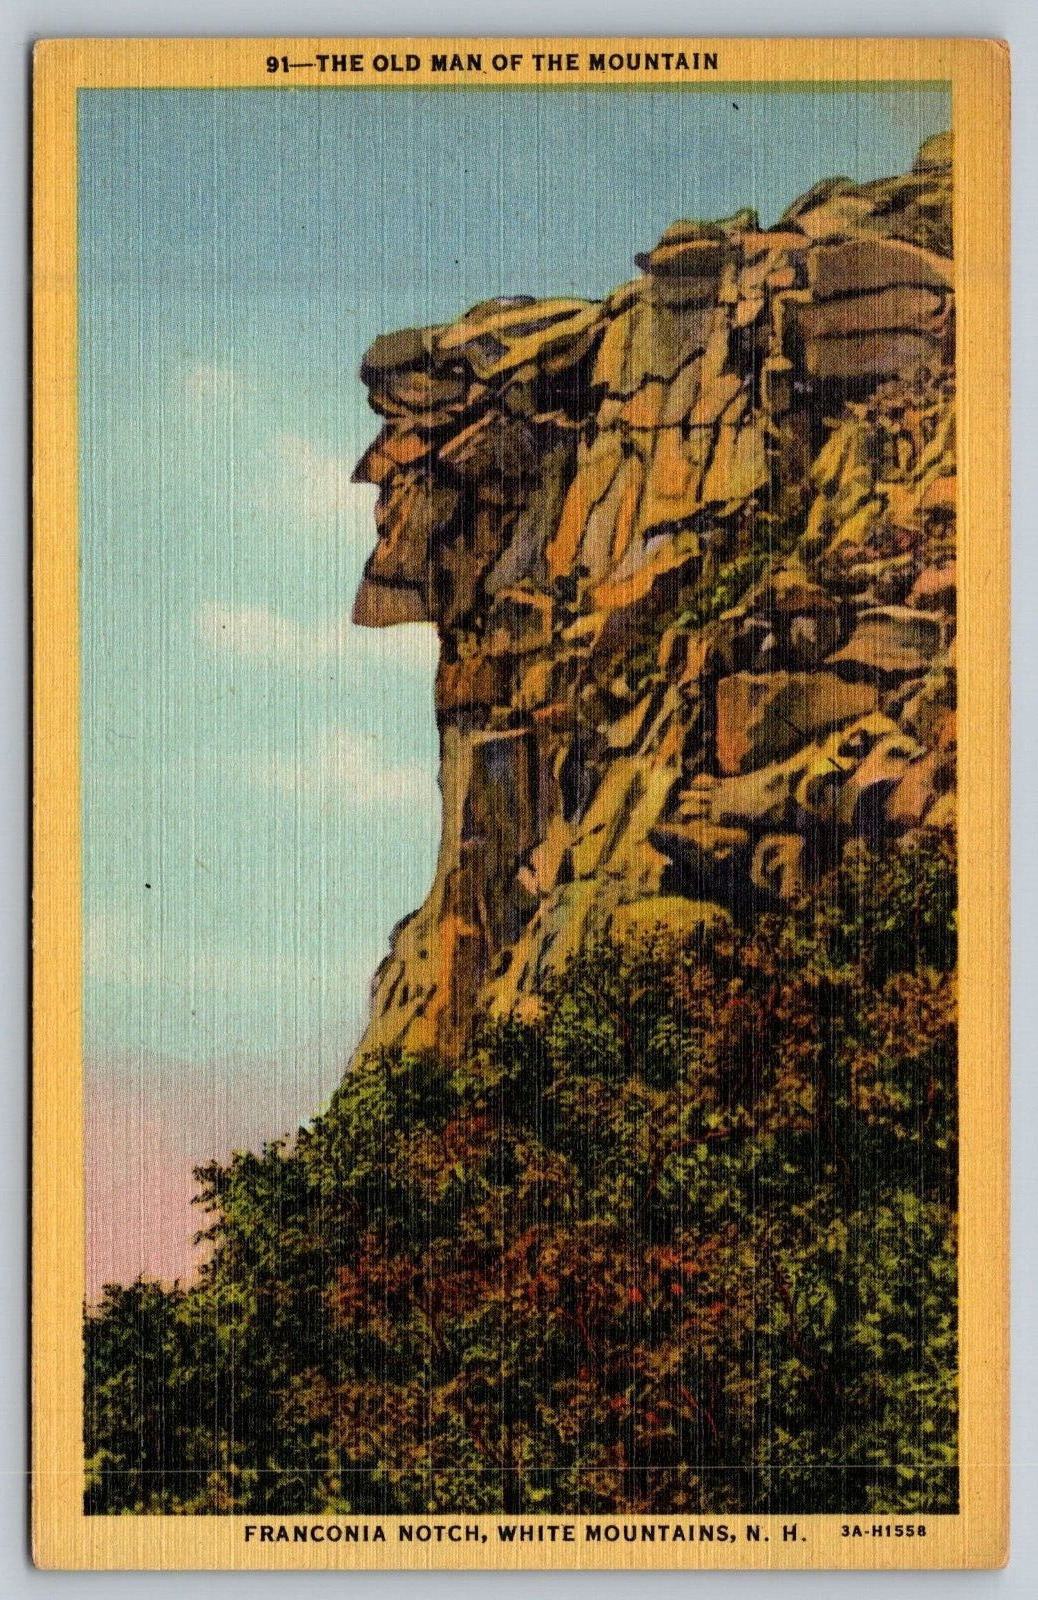 The Old Man of the Mountains, Franconia Notch, White Mountains, NH, Postcard